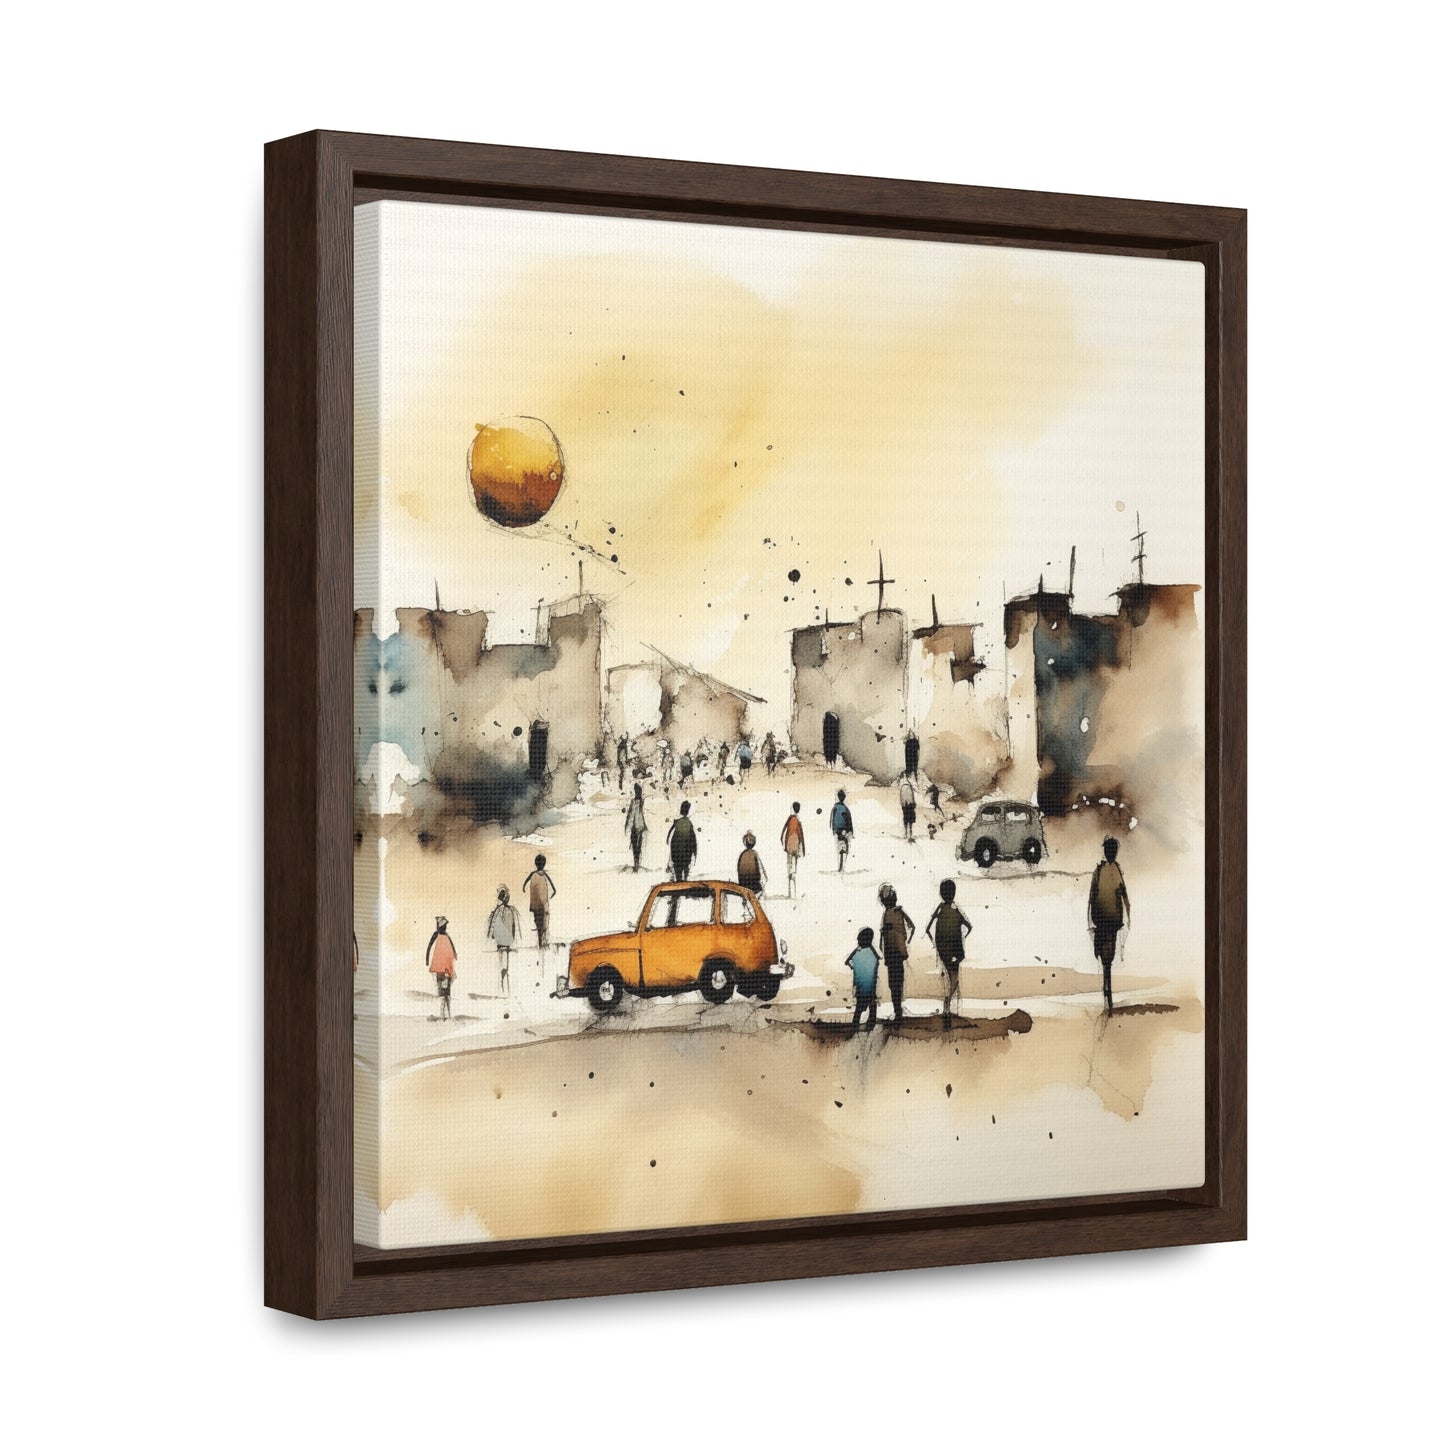 Childhood 7, Valentinii, Gallery Canvas Wraps, Square Frame